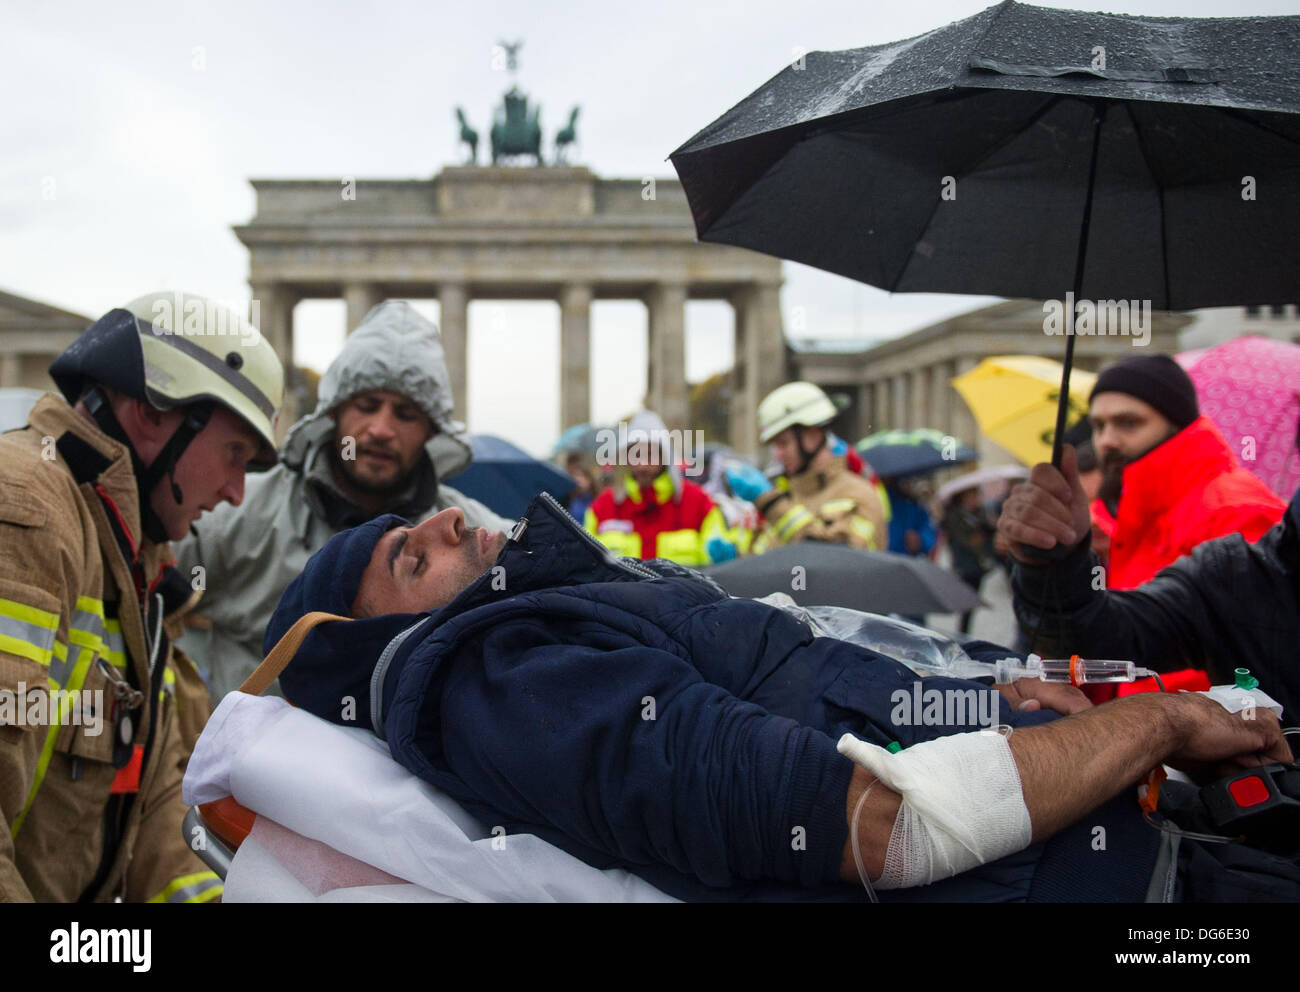 Berlin, Germany. 15th Oct, 2013. Rescue workers take a refugee on a stretcher to a hospital on Pariser Platz in Berlin, Germany, 15 October 2013. Three refugees had to be taken to hospital because of their poor state of health. The refugees have been on hunger strike since 09 October 2013. Photo: OLE SPATA/dpa/Alamy Live News Stock Photo